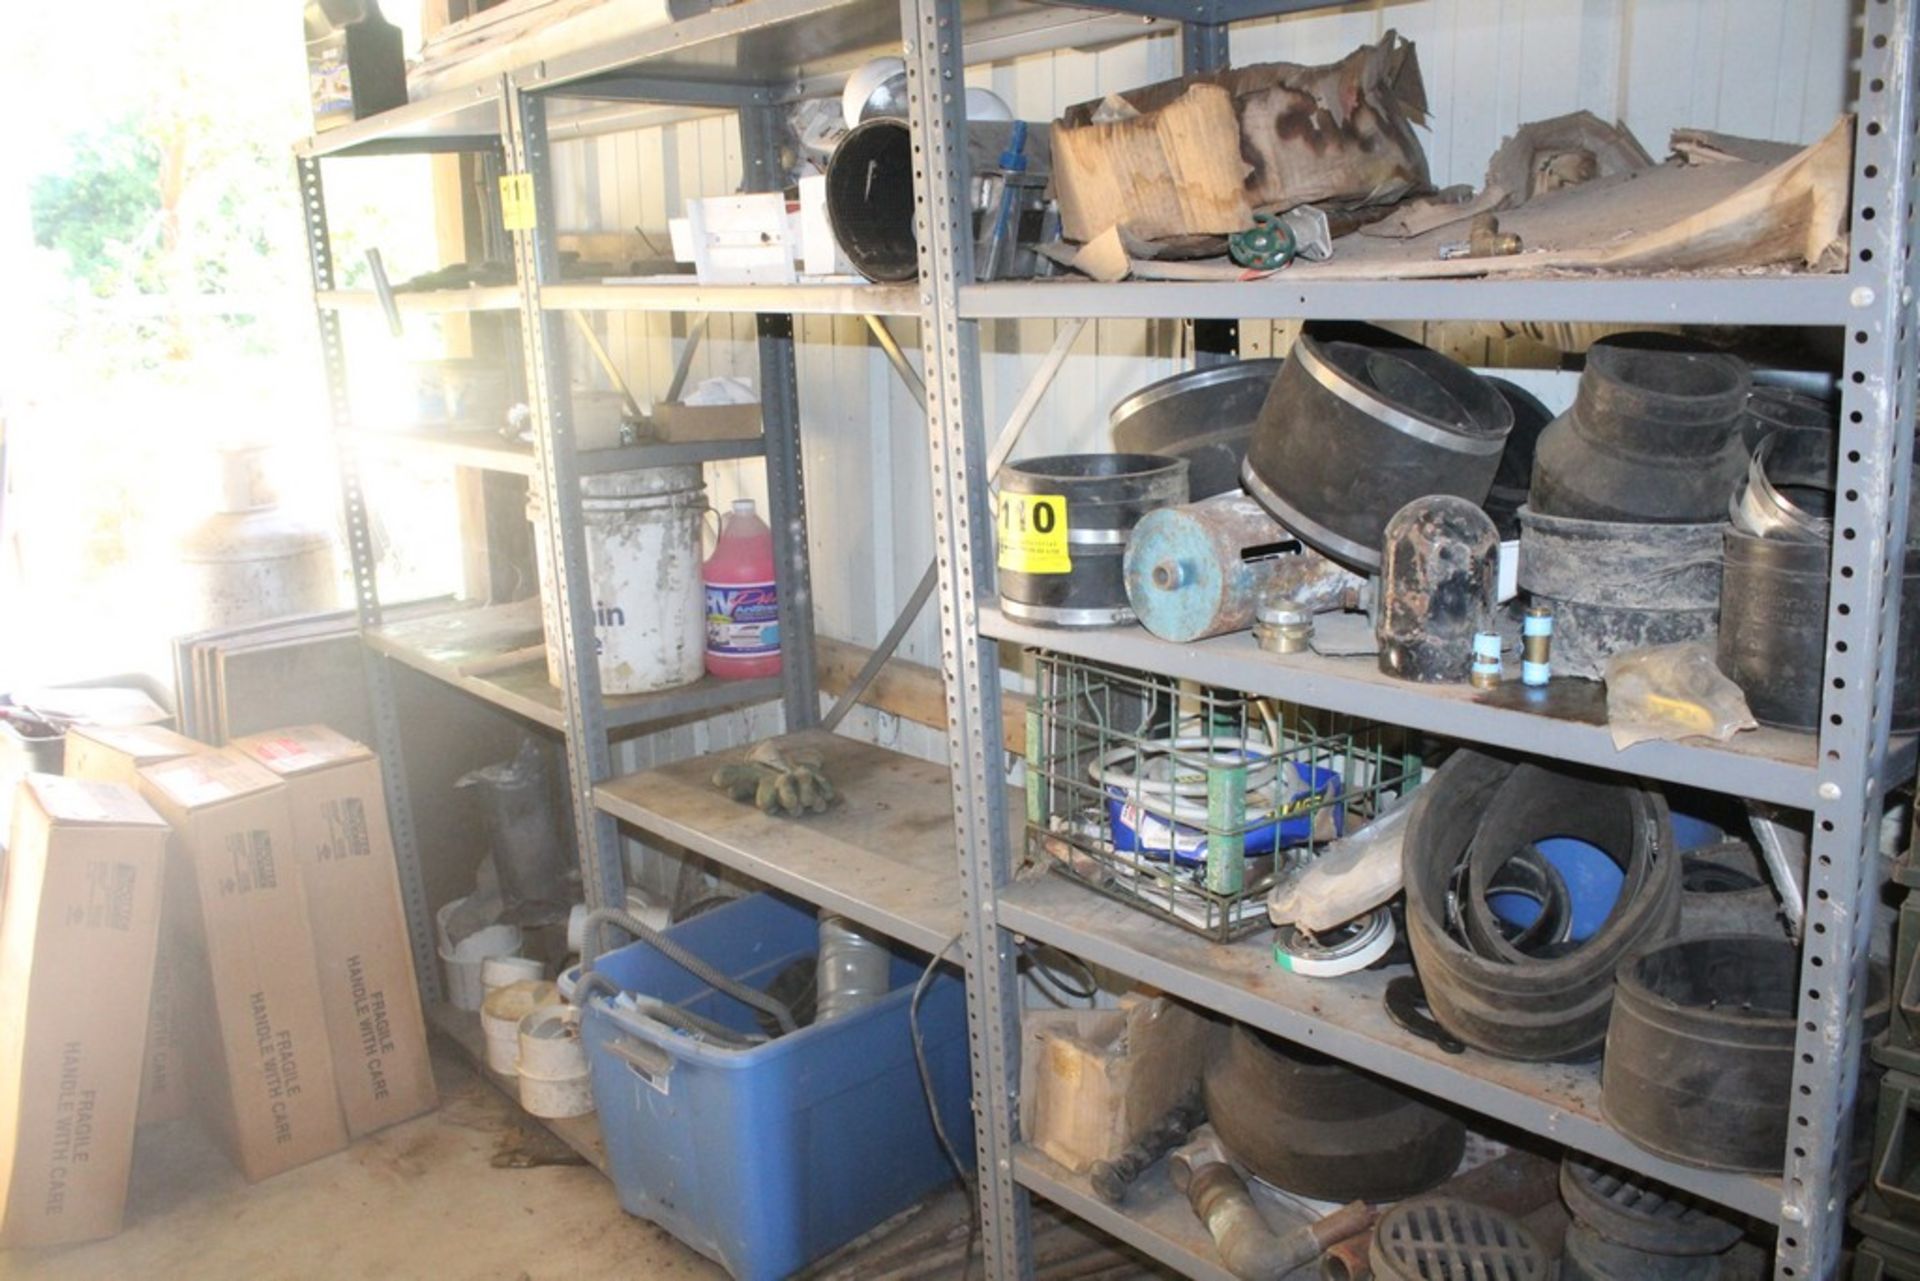 CONTENTS OF (3) SHELVING UNITS INCLUDING GASKETS, COUPLERS, FITTINGS & MISC. PLUMBING SUPPLIES (NO